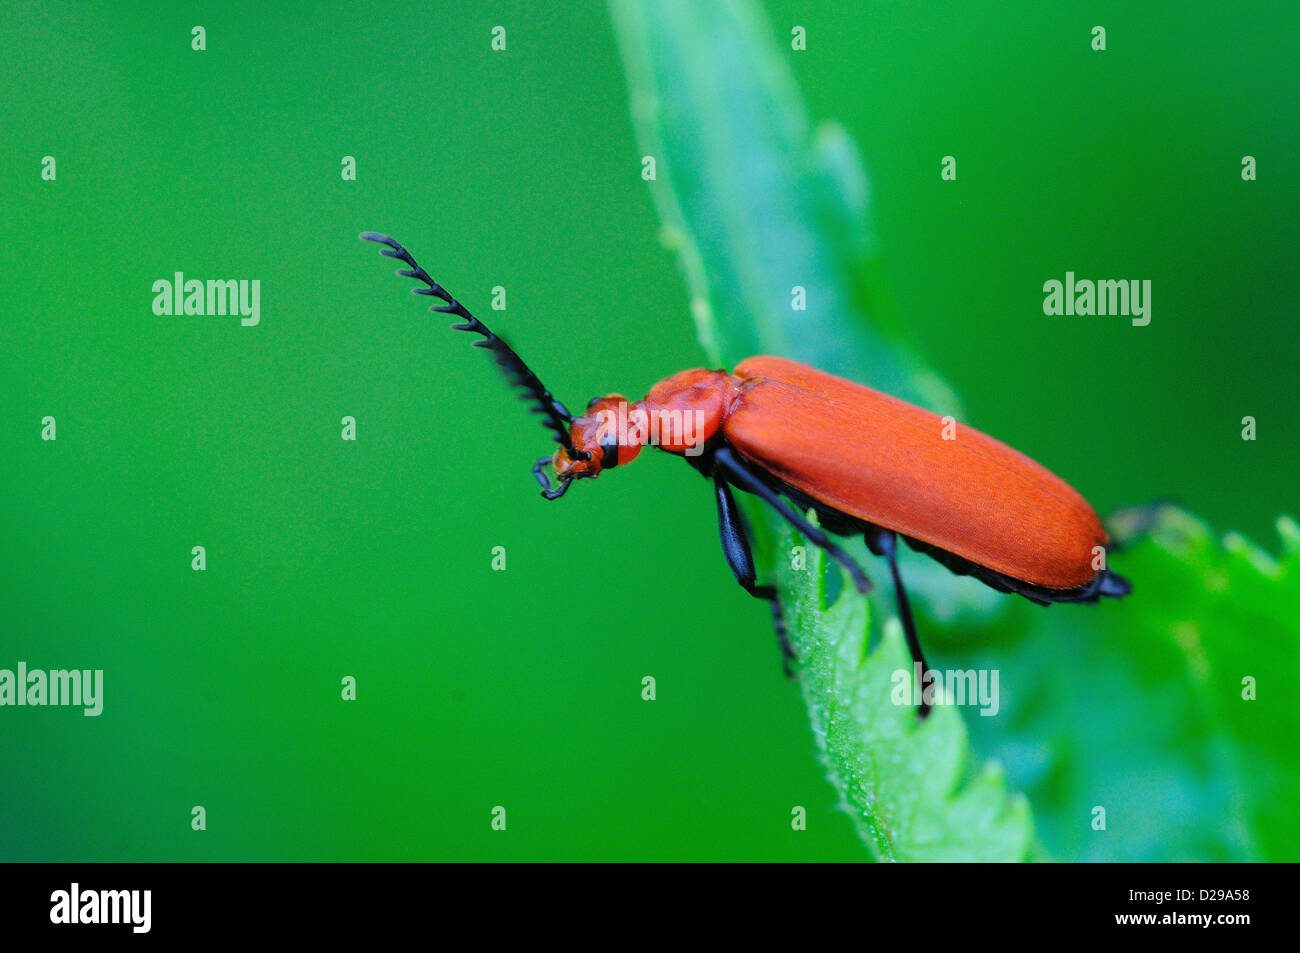 Cardinal beetle at rest on a green leaf. Dorset, UK May 2012 Stock Photo